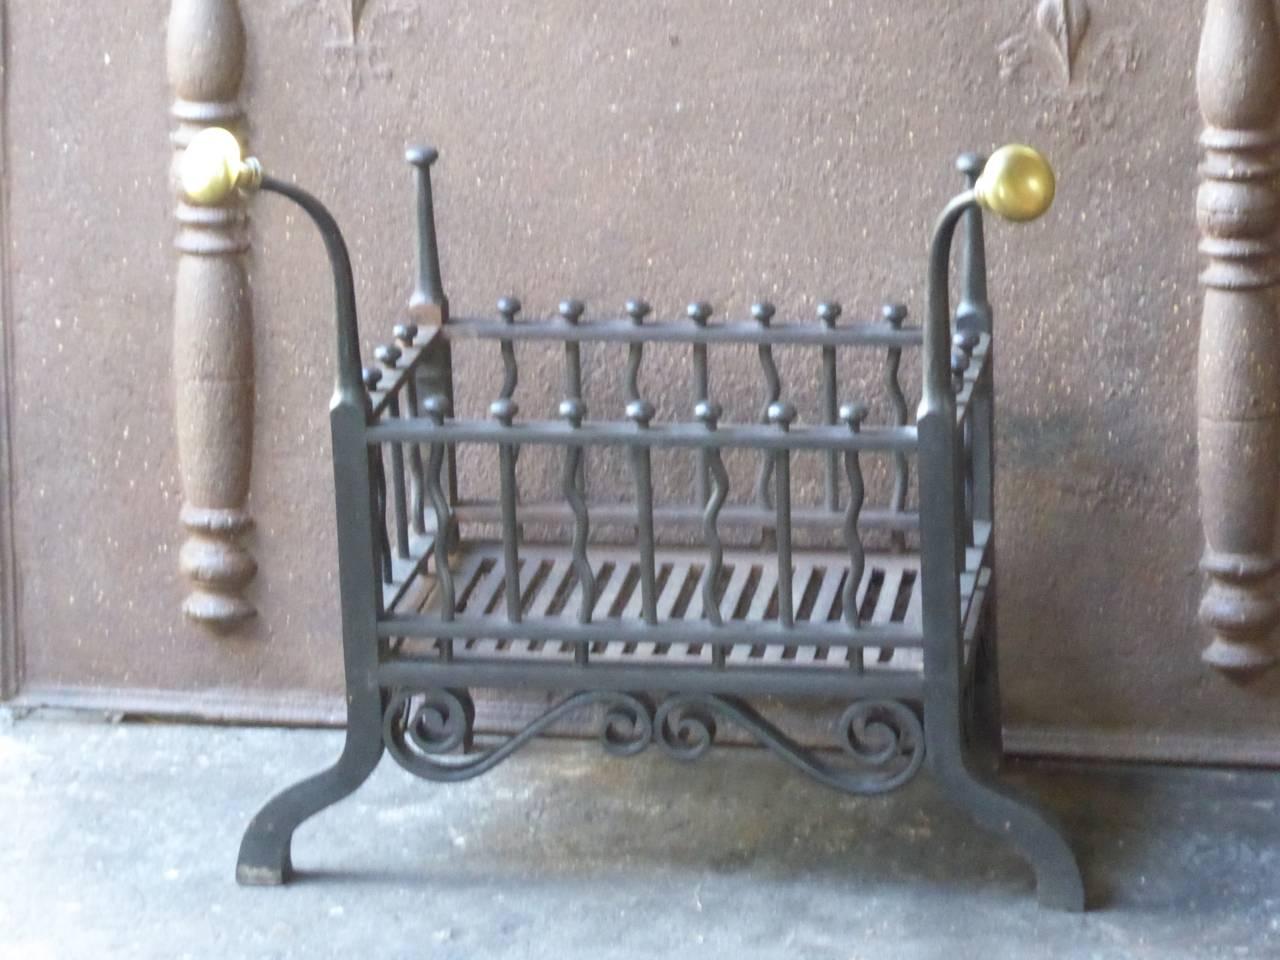 English Art Nouveau fire grate made of cast iron, wrought iron and brass. The total width of the grate is 62cm and the width of the basket itself is 43.5cm.

We have a unique and specialized collection of antique and used fireplace accessories